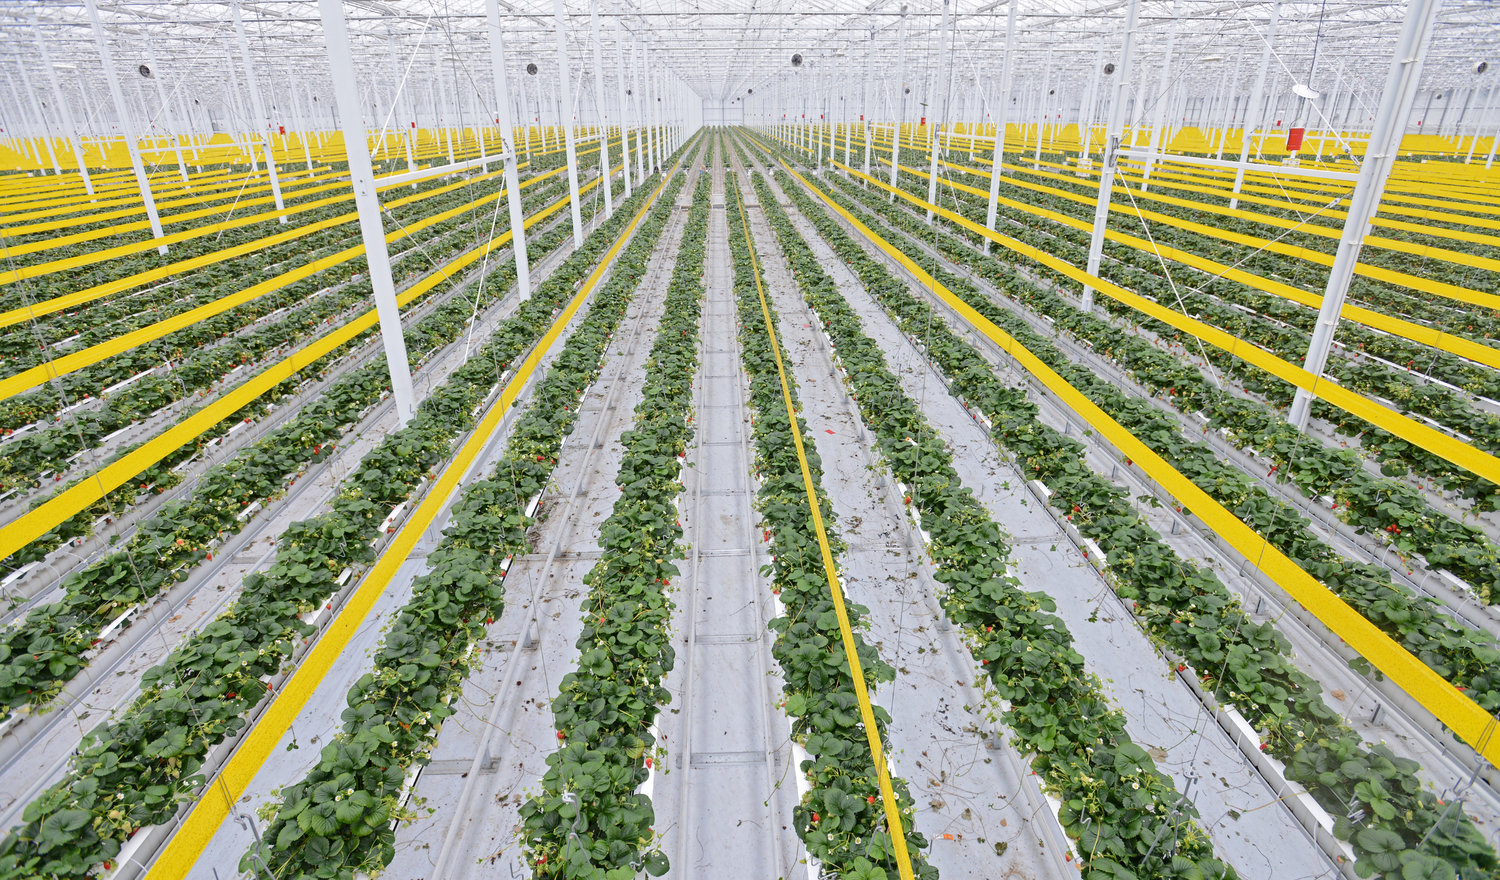 P.L. Light Systems Expert Articles: The Ultimate Guide to Indoor Strawberry Cultivation